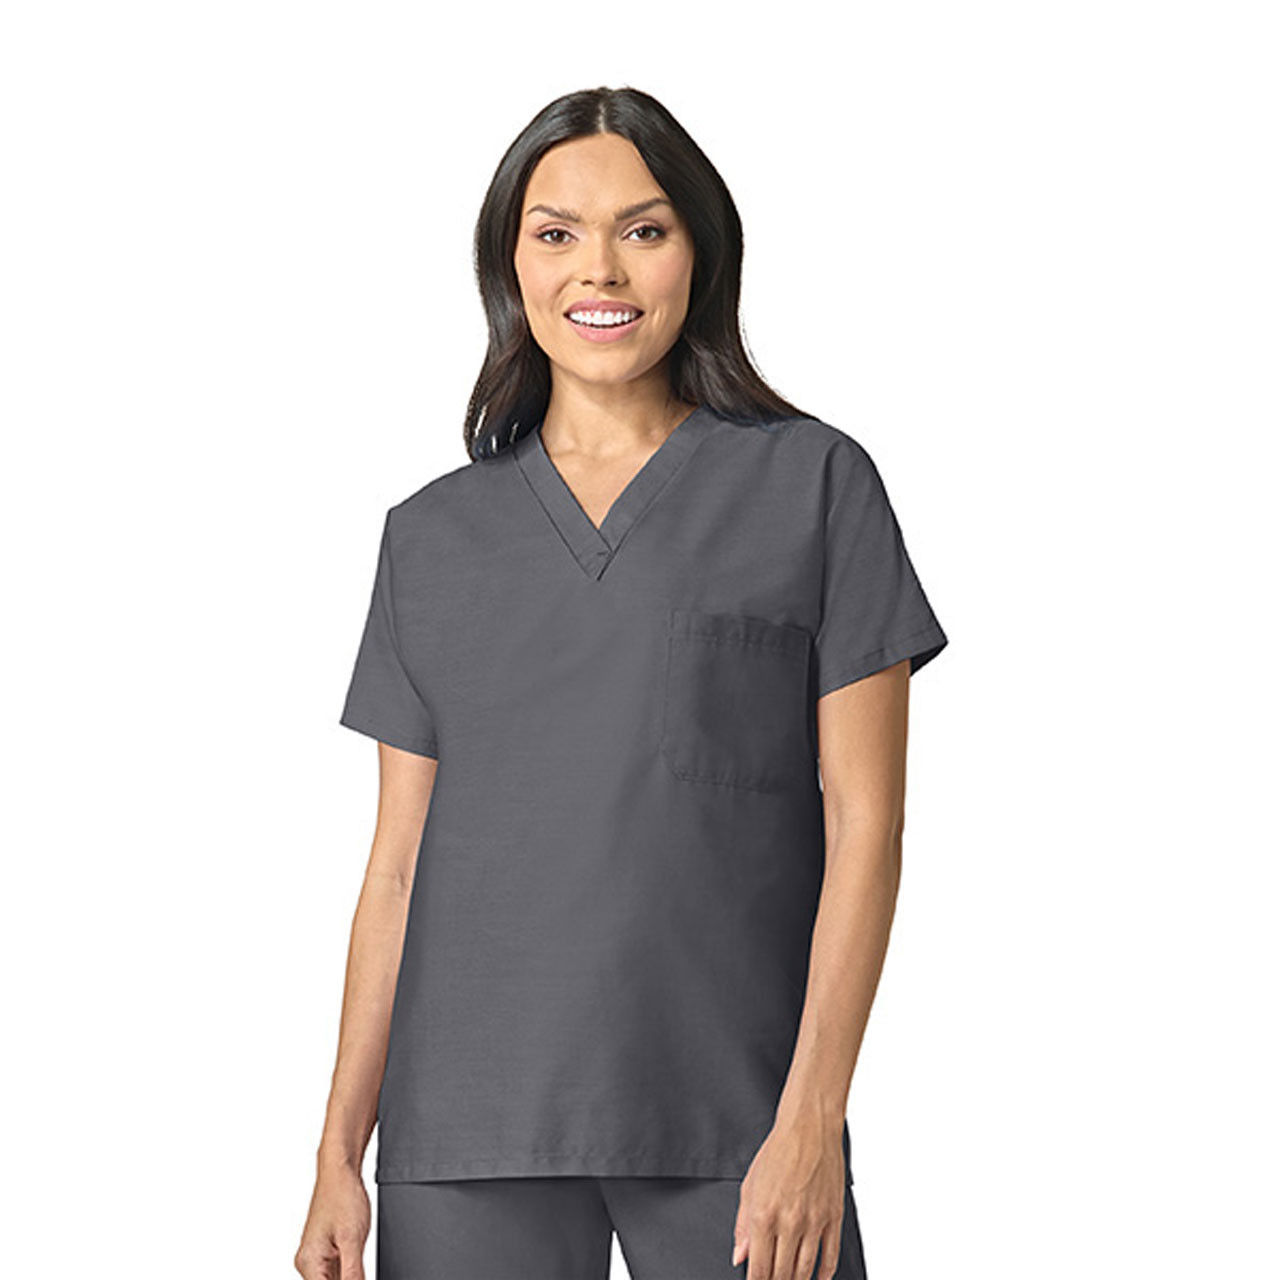 Can the Pewter Gray Scrub Top be worn in different roles?